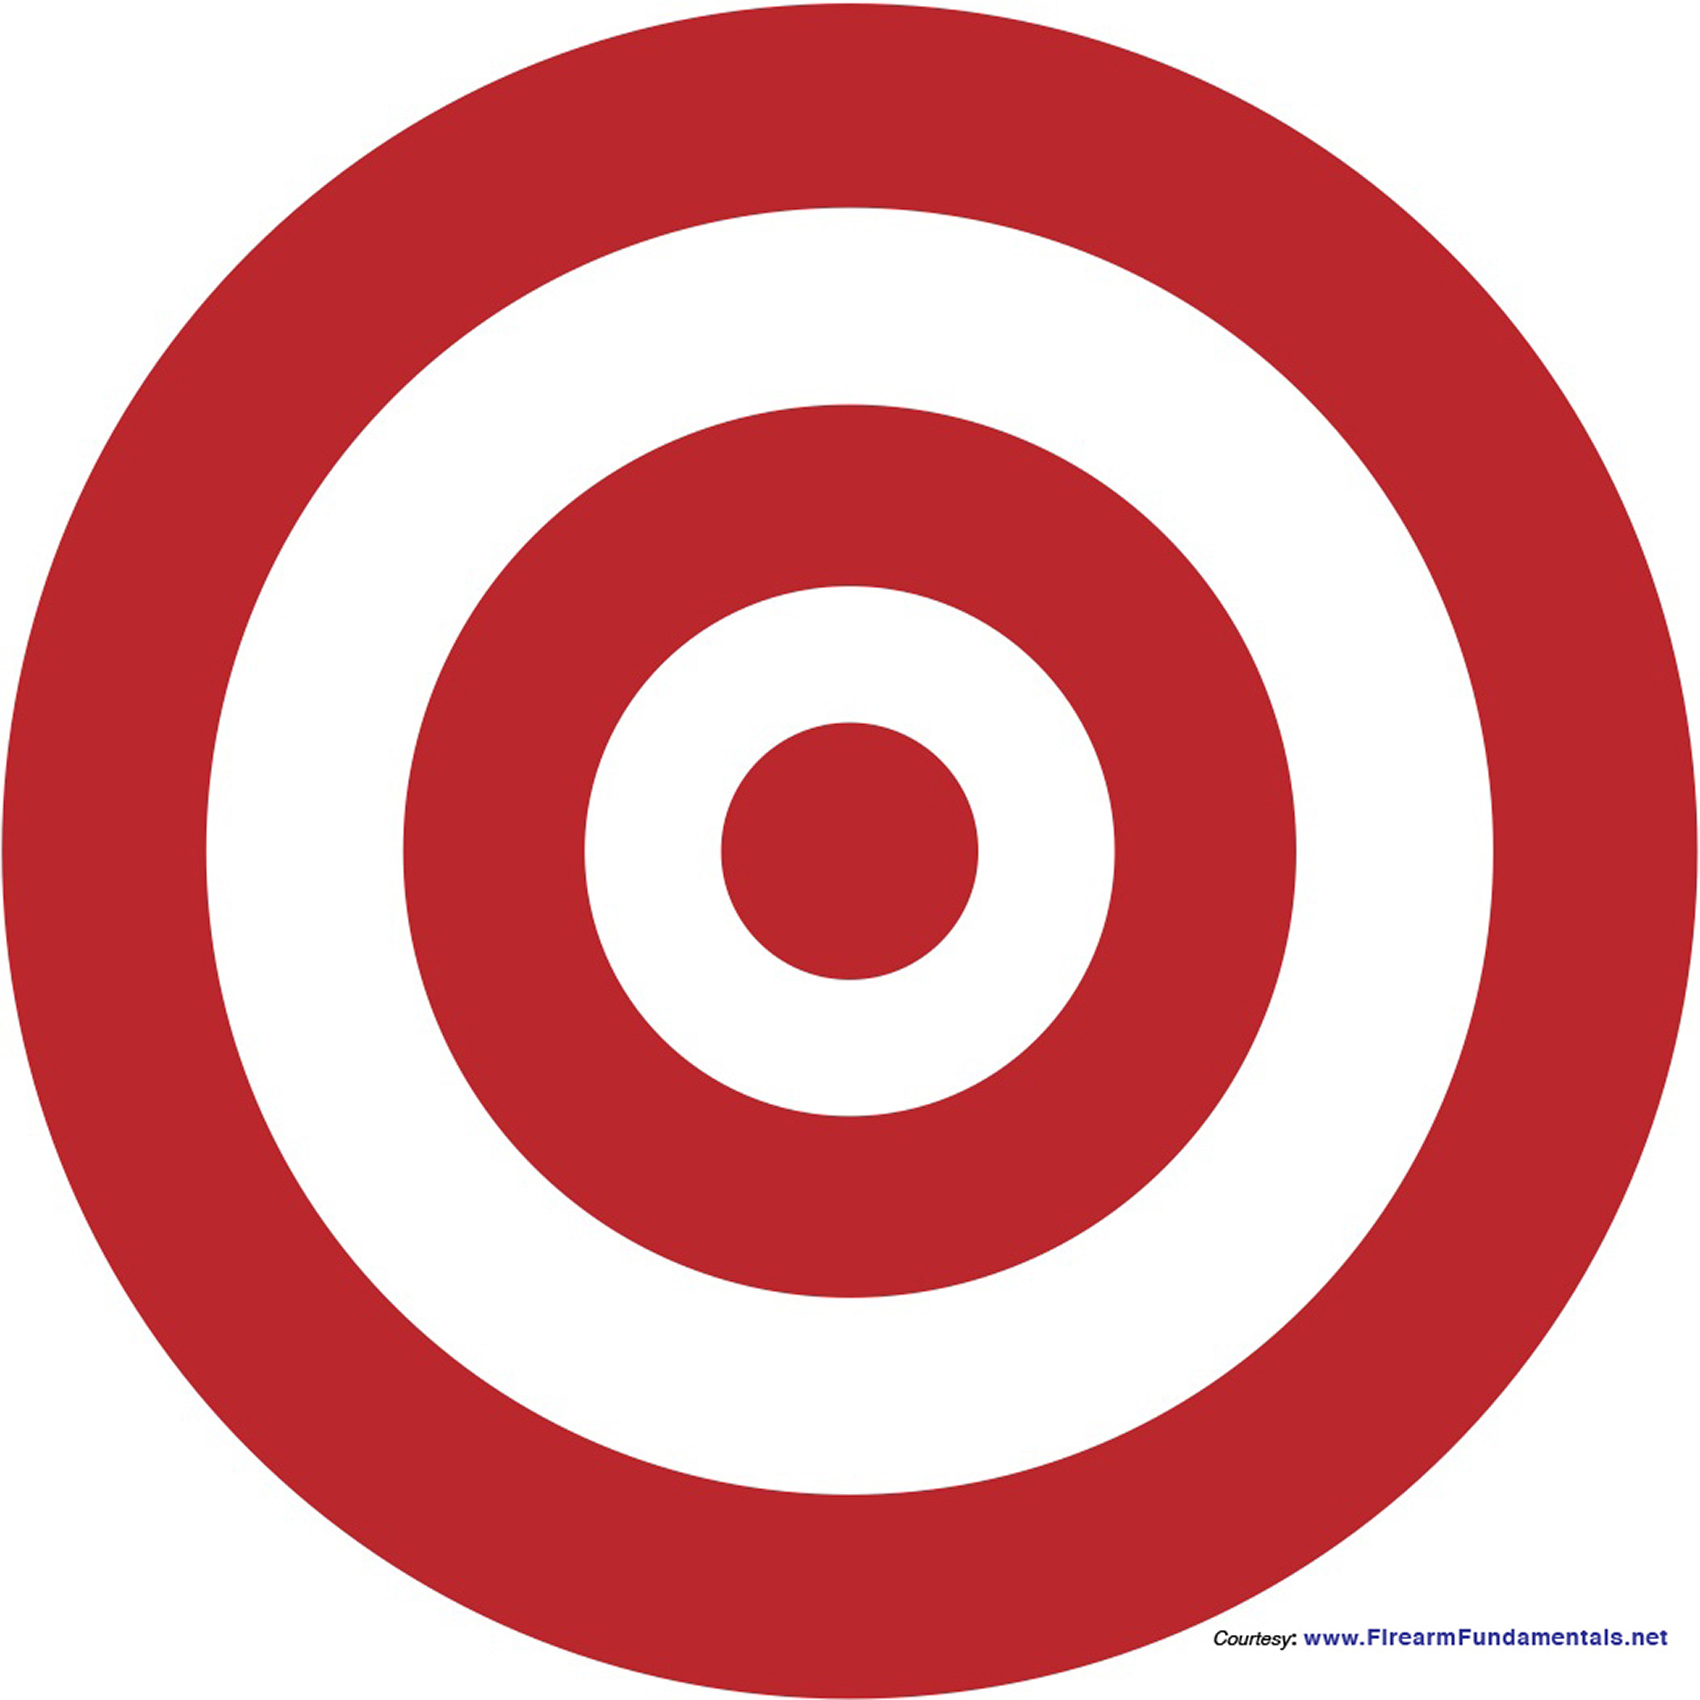 25 Bullseye Images Free Cliparts That You Can Download To You Computer